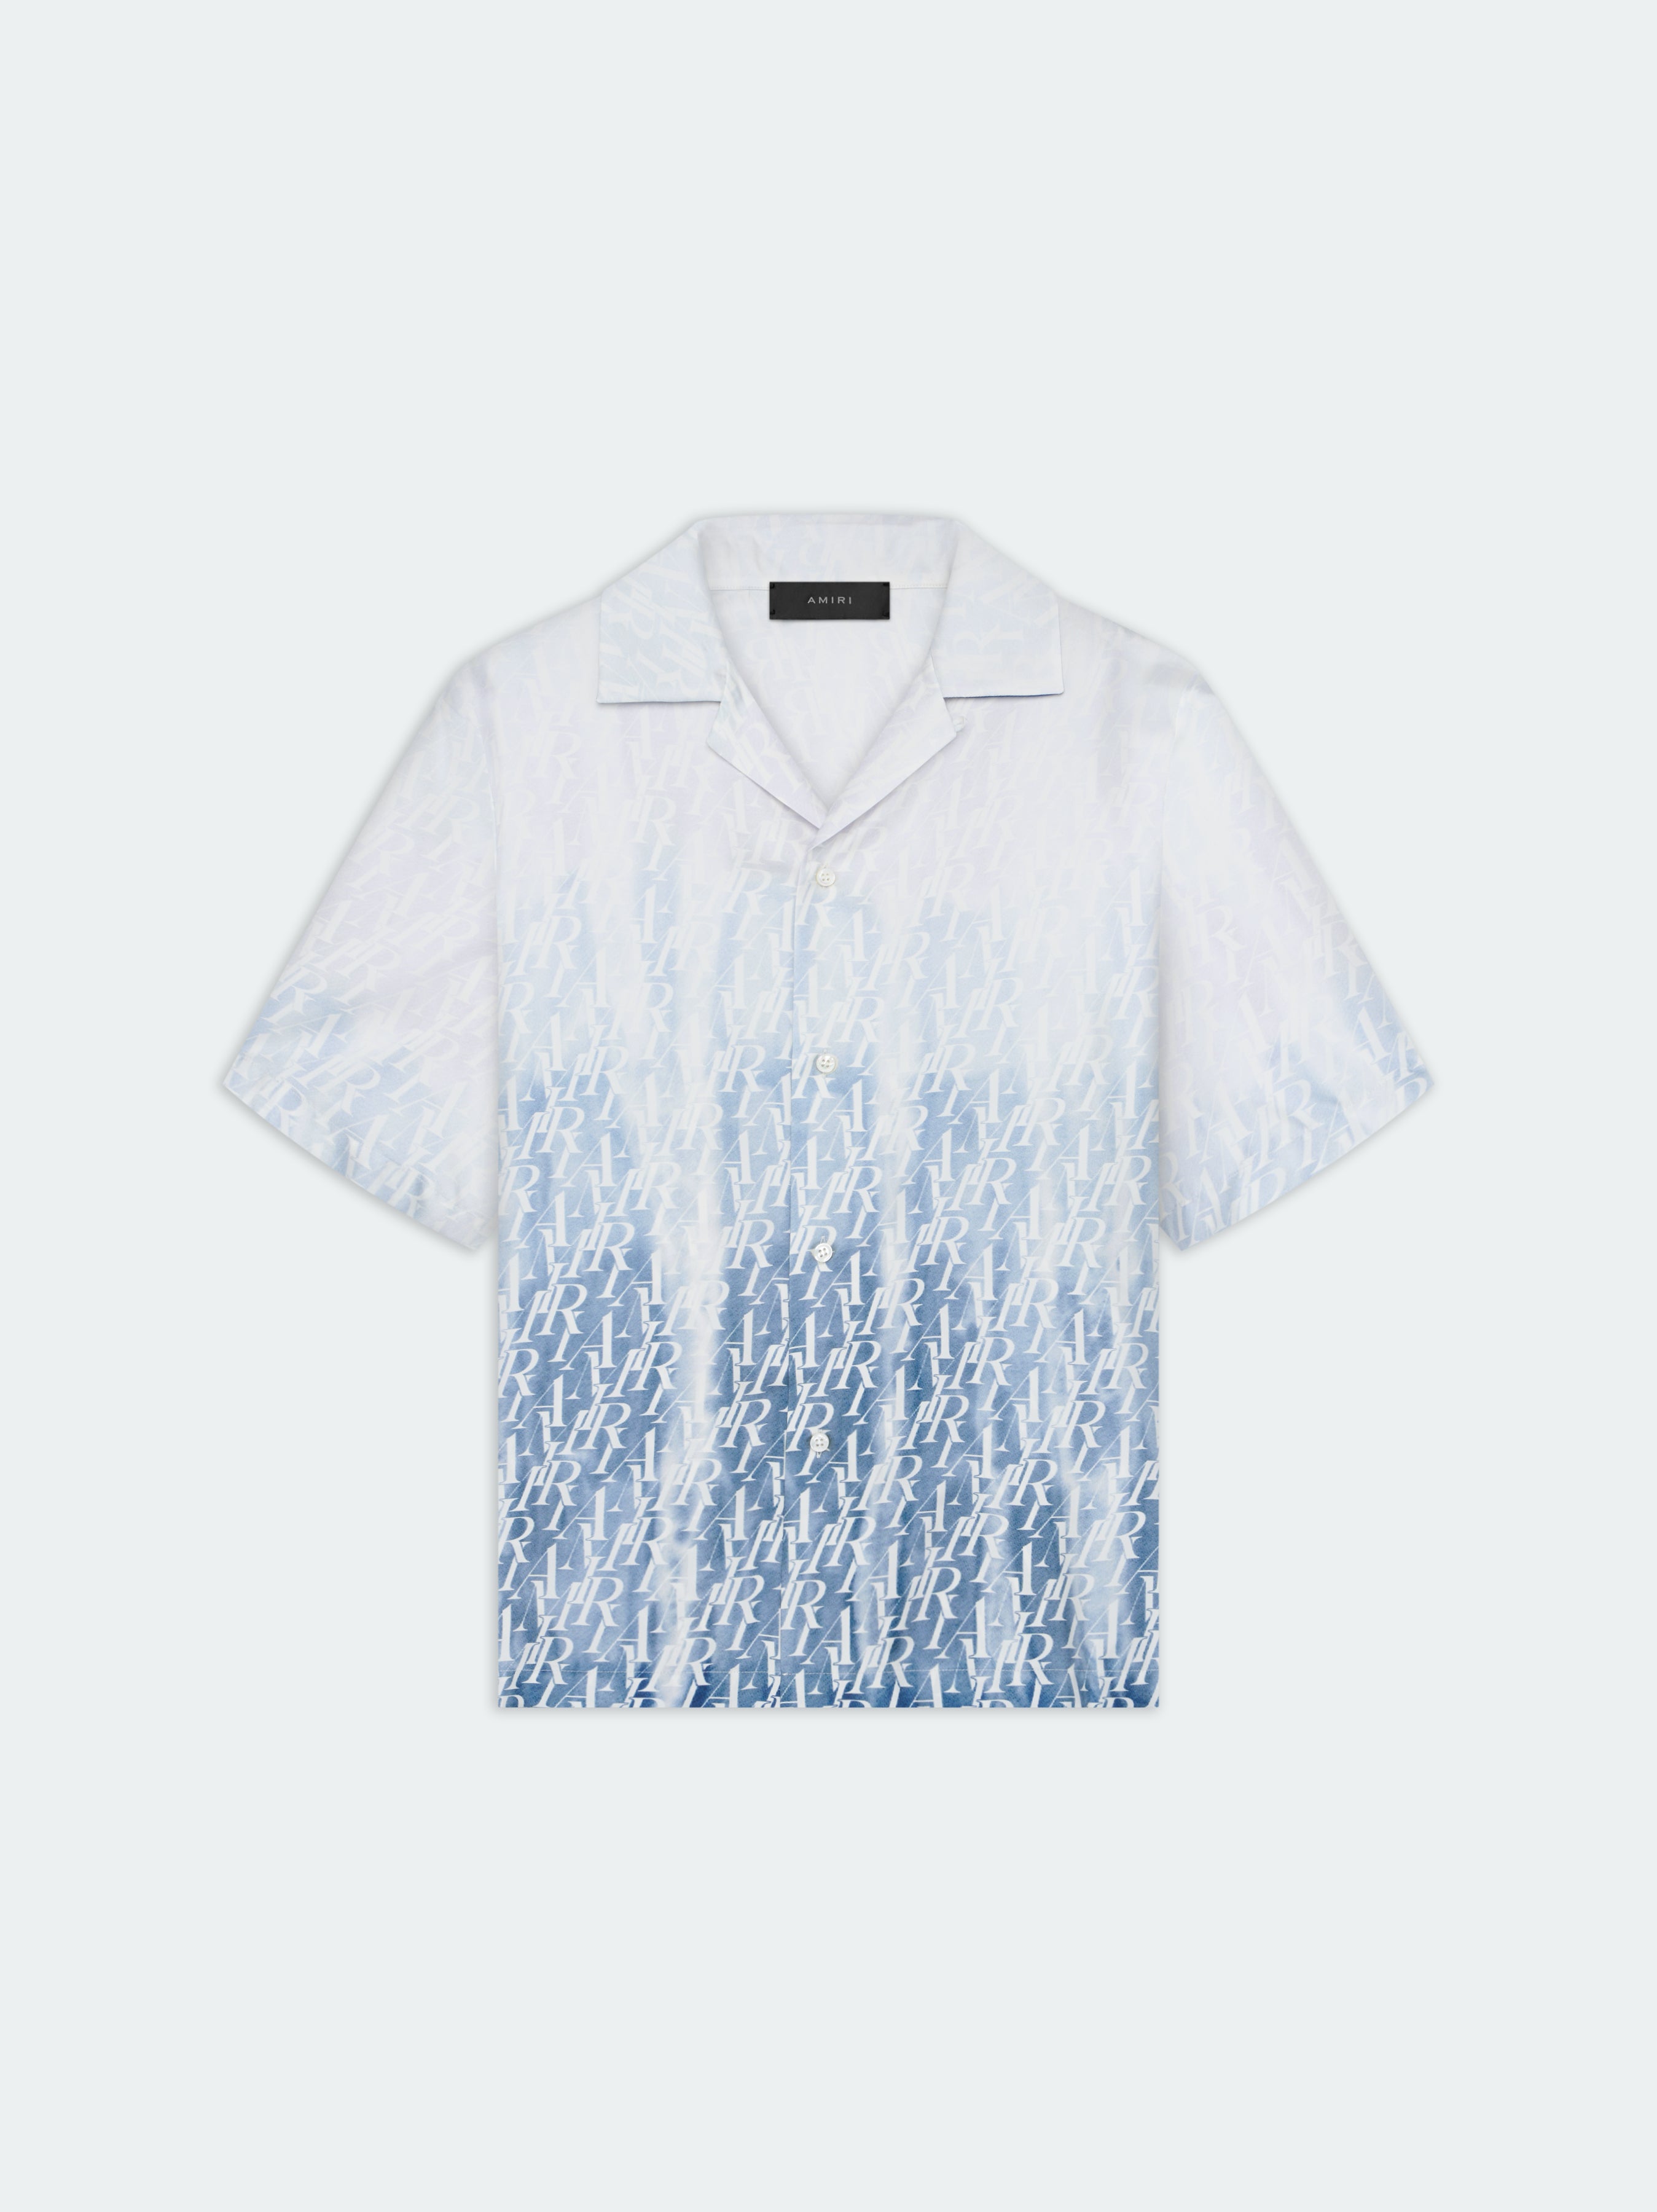 Product GRADIENT AMIRI REPEAT BOWLING SHIRT - Ashley Blue featured image